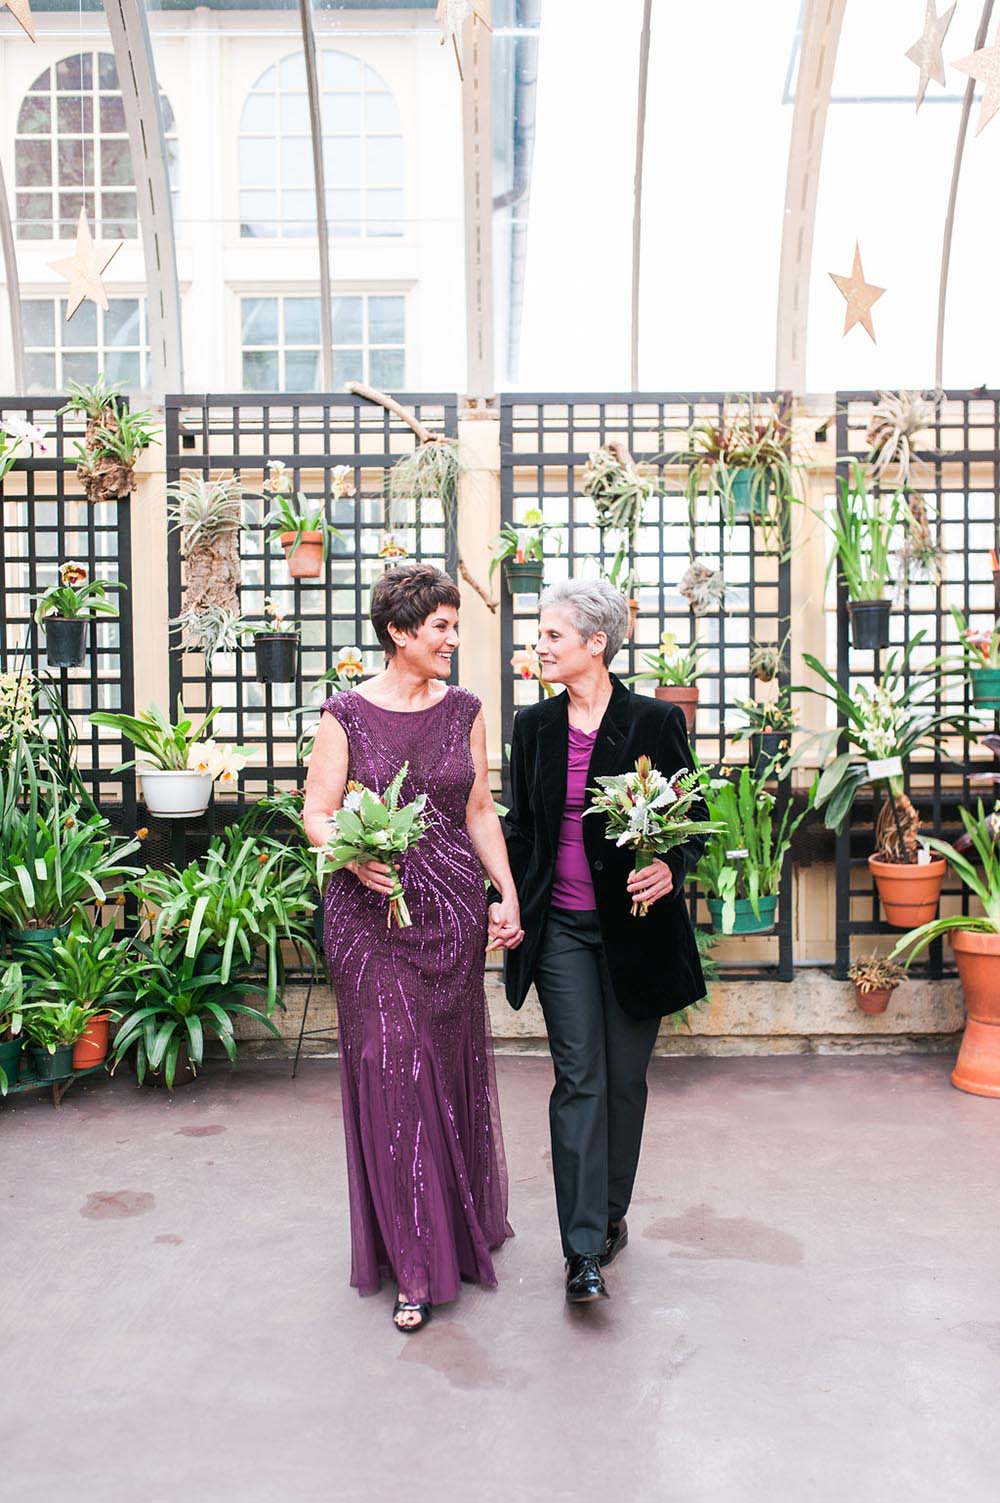 Couple Together 20 Years Tie The Knot In Botanical Garden Wedding